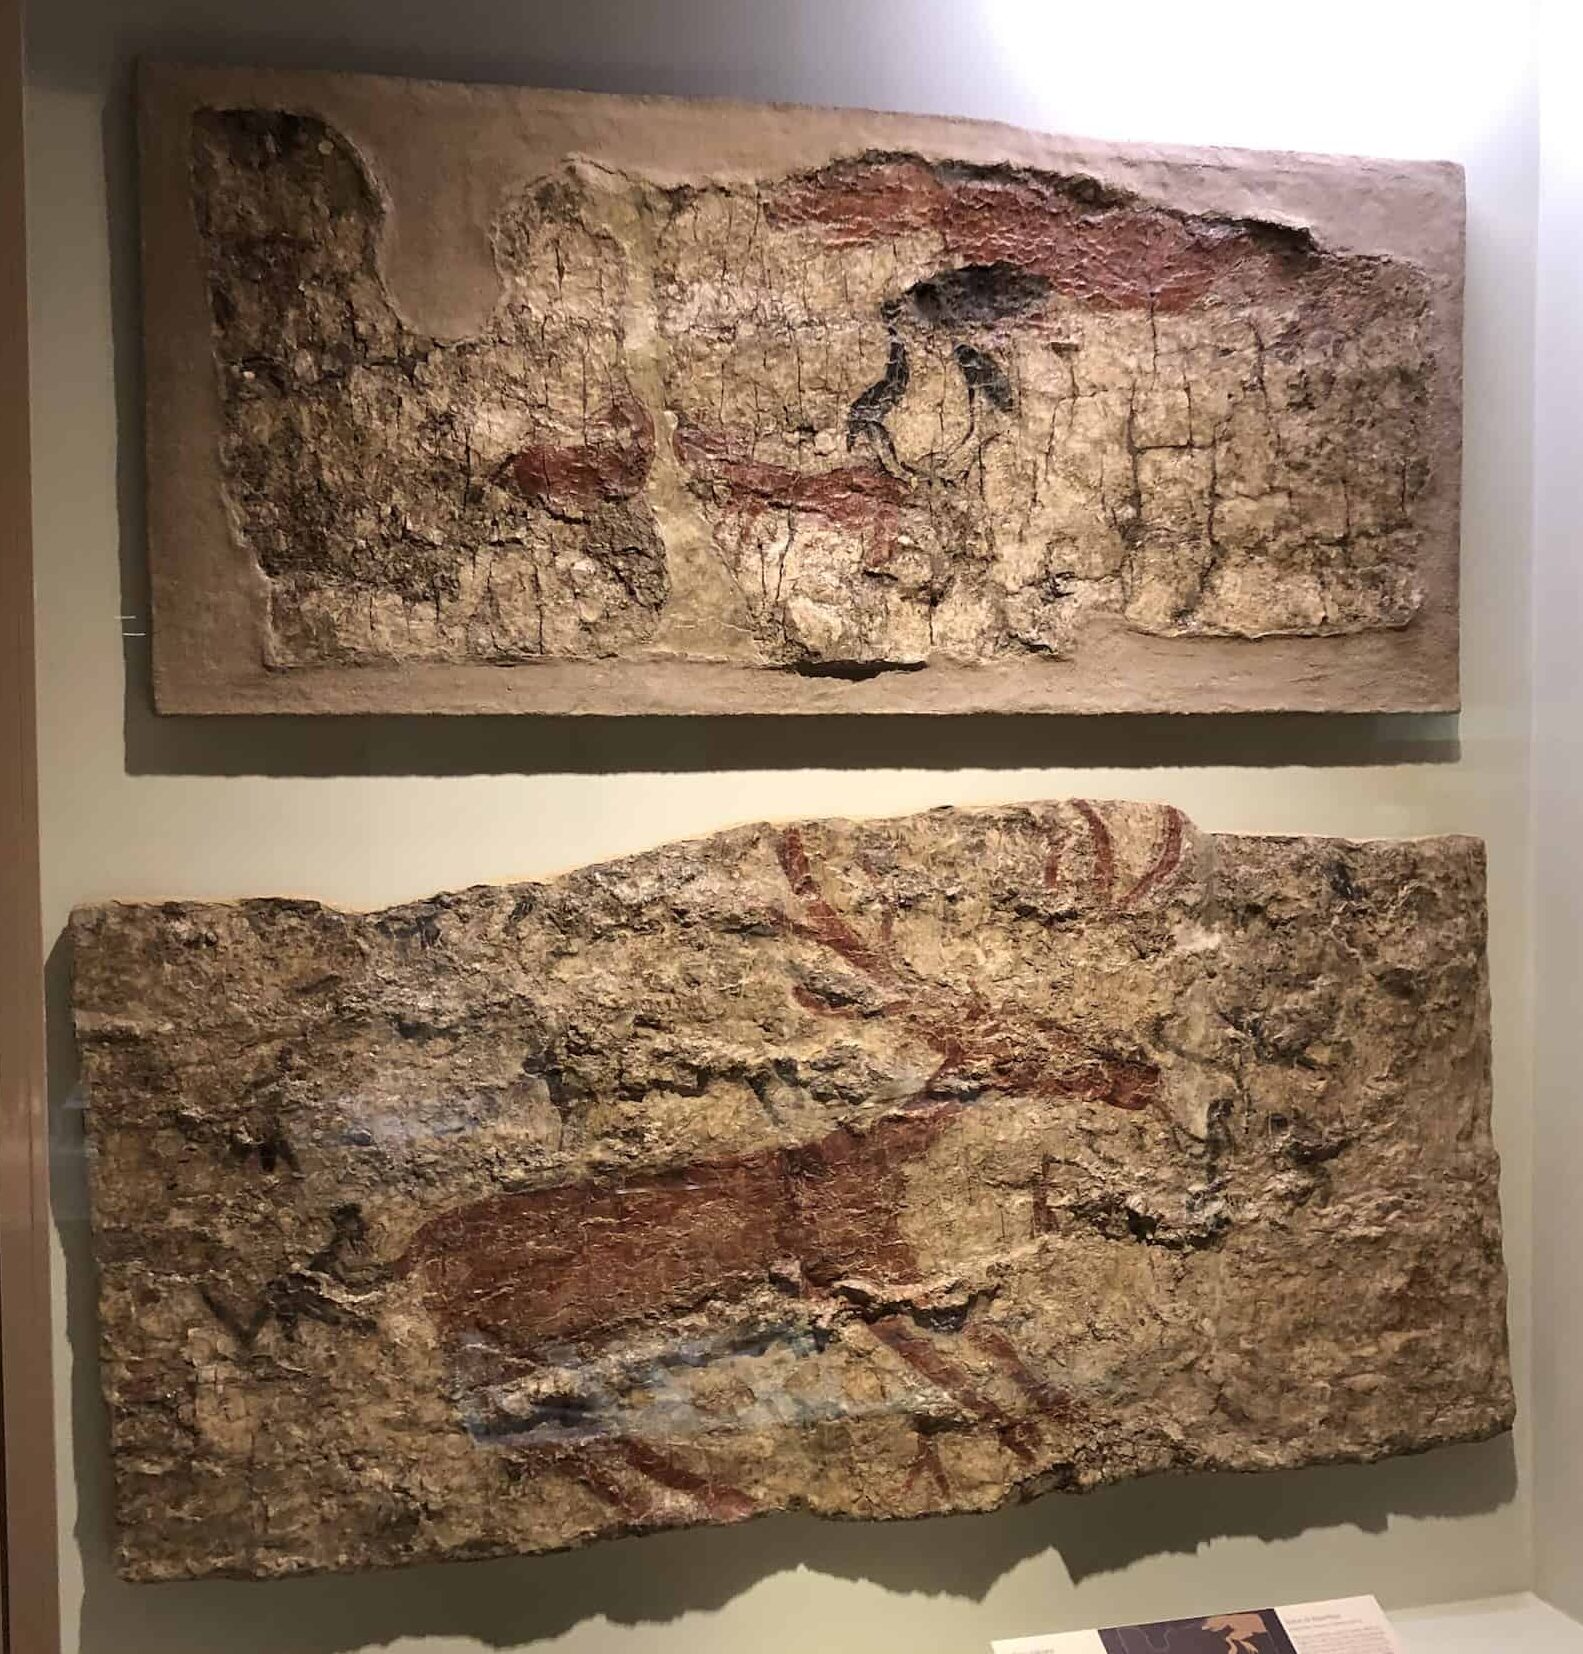 Cave paintings at the Museum of Anatolian Civilizations in Ankara, Turkey